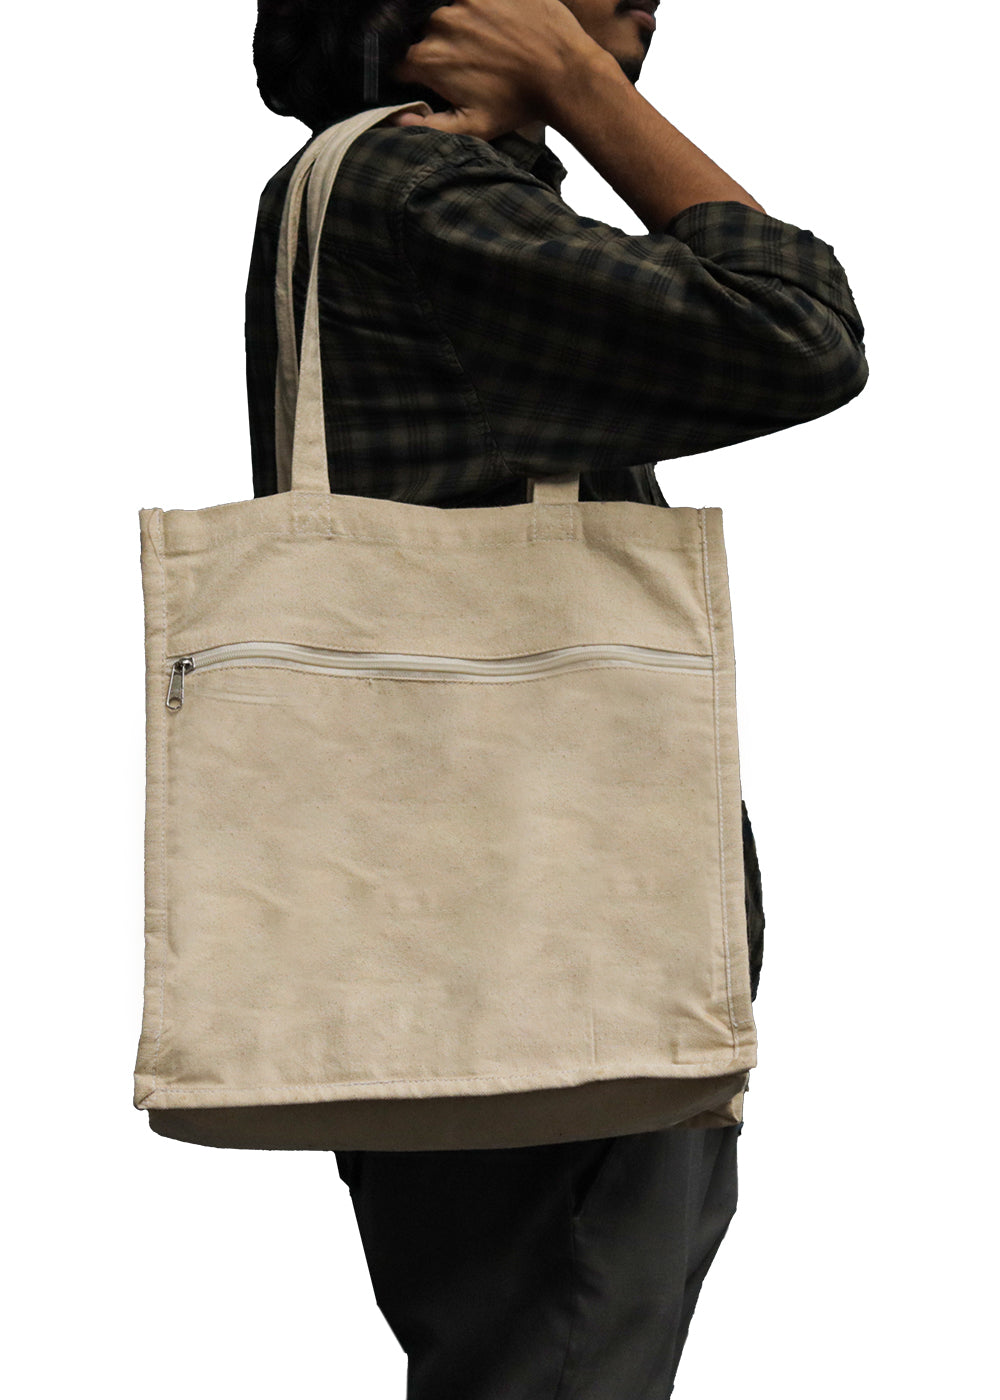 Vegetable Bag with Full Handle Stitching & Multiple Compartments